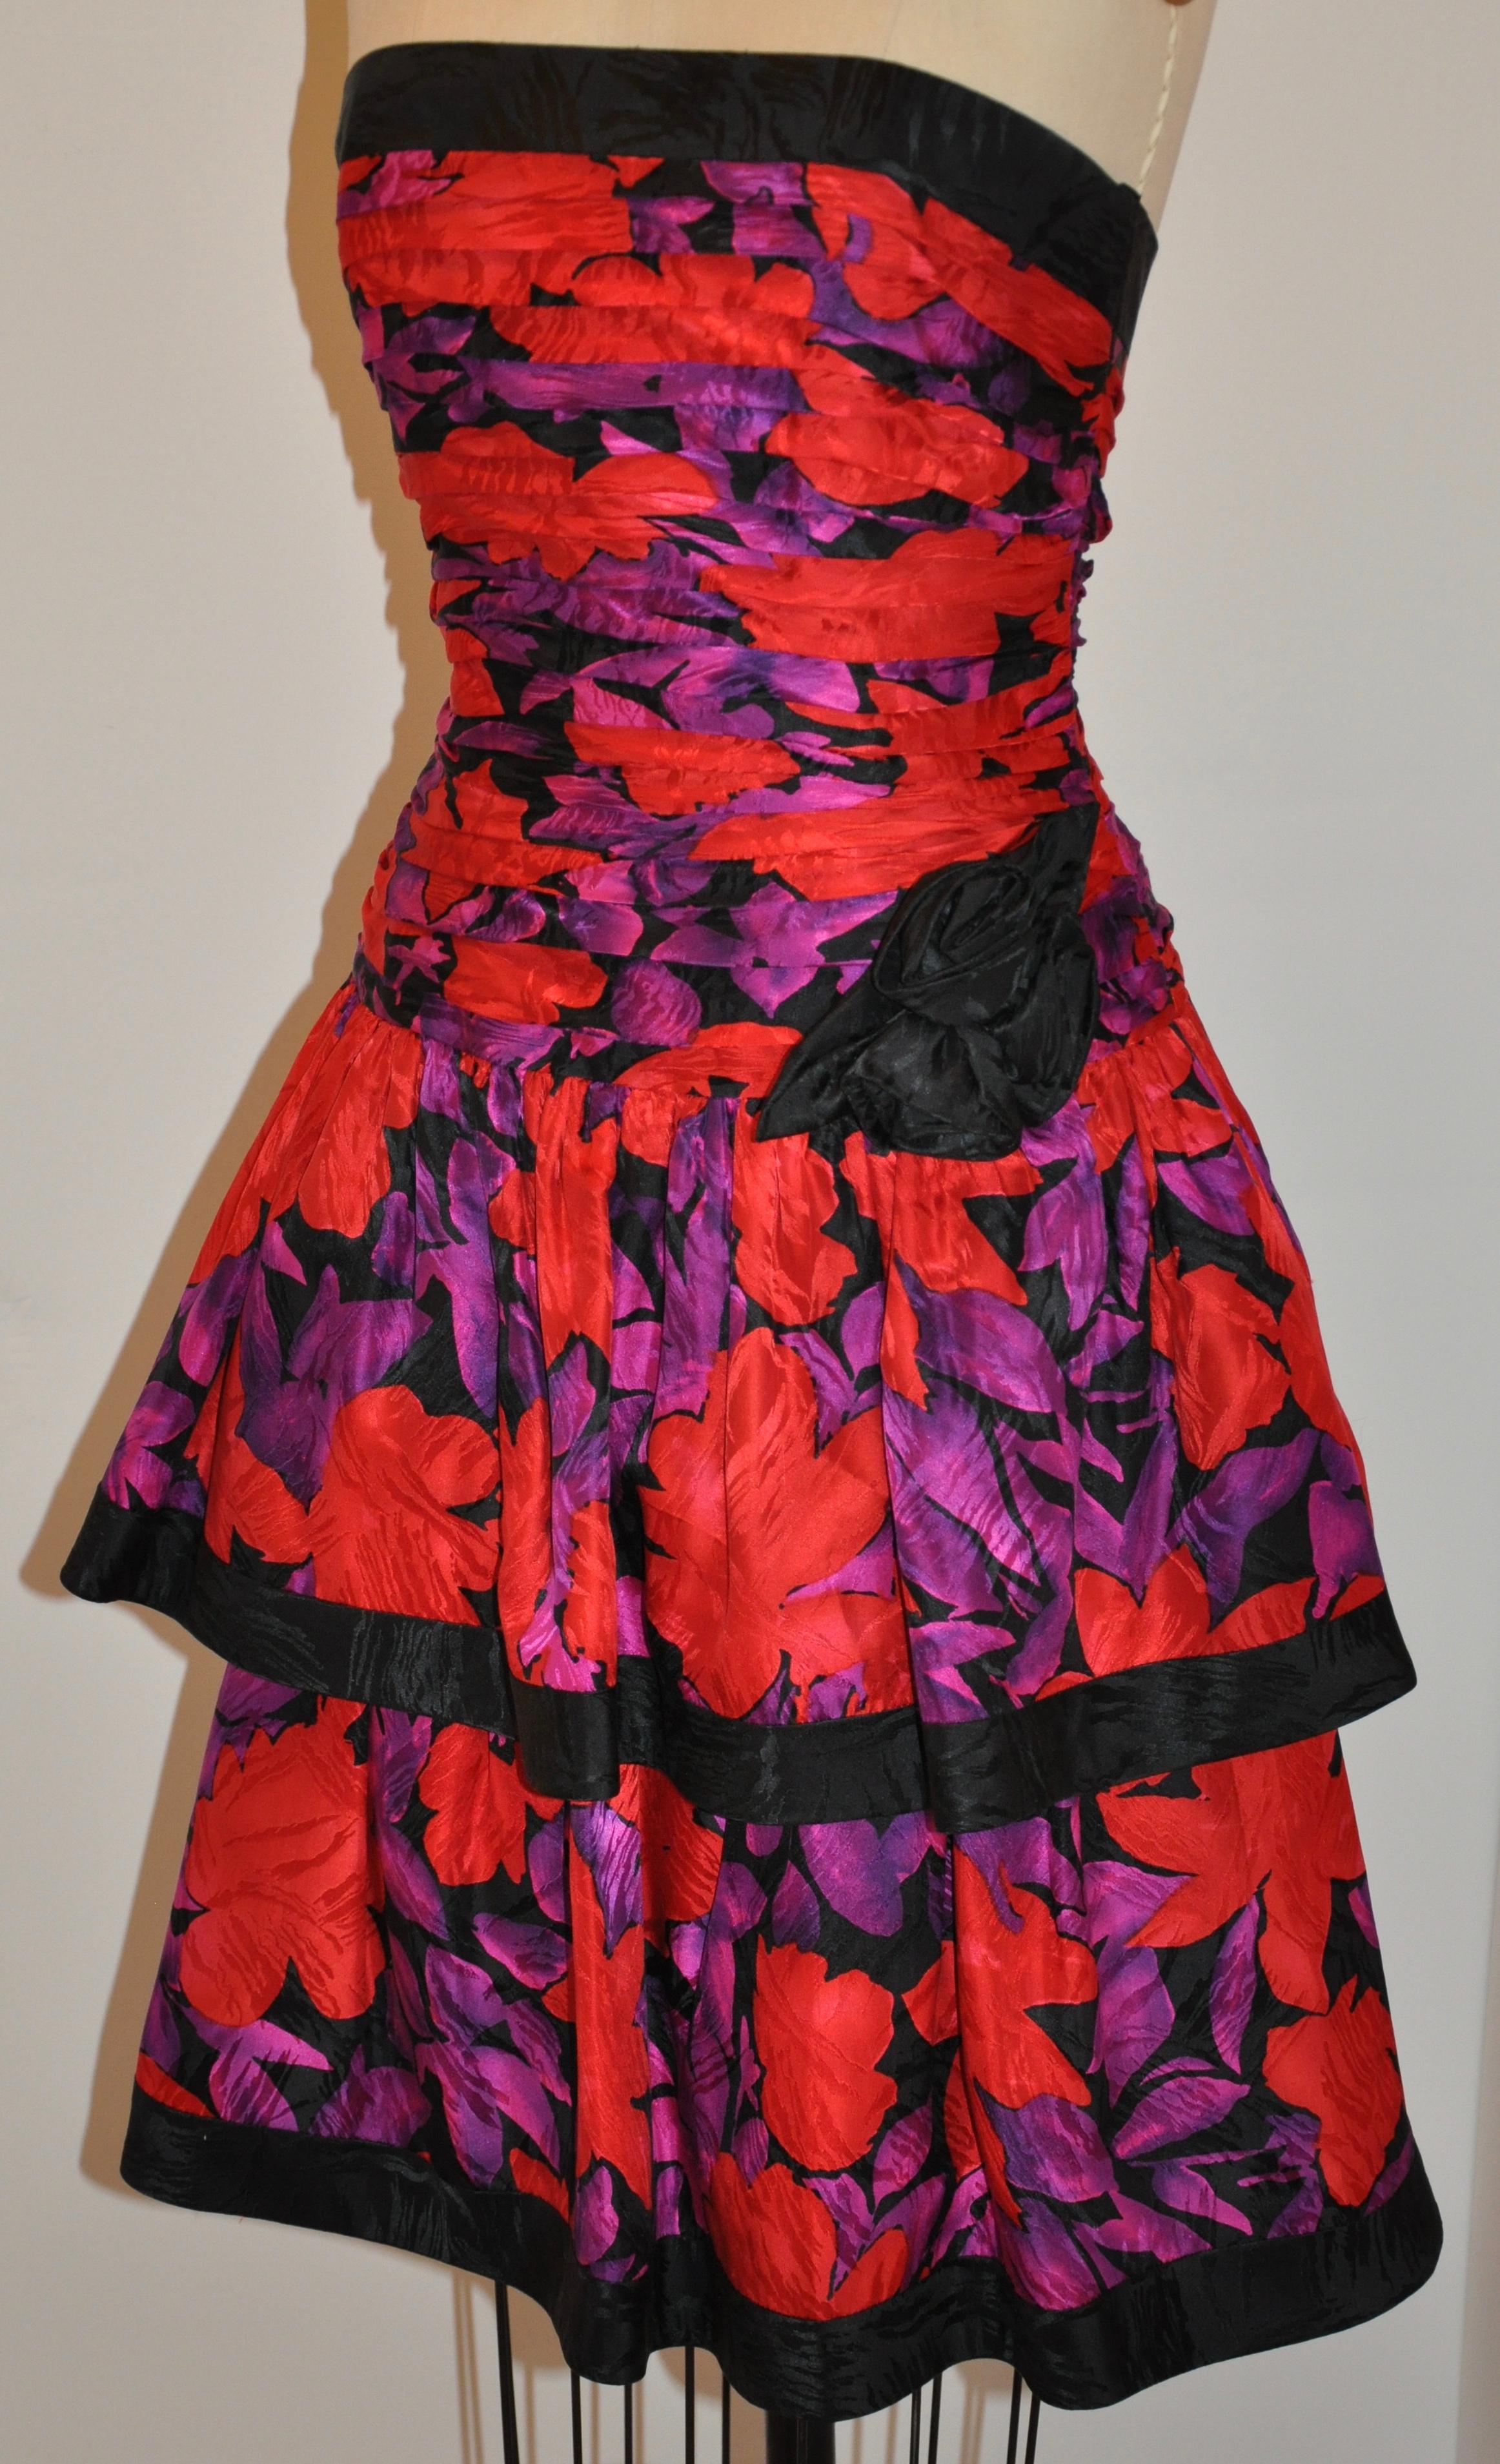          A.J. Bari wonderfully elegant silk 2-tier strapless floral print cocktail dress is fully lined with an invisible side zipper measuring 13 1/2 inches with a nook & eye on top. The bust measures 34 1/2 inches. The length in front measures 33